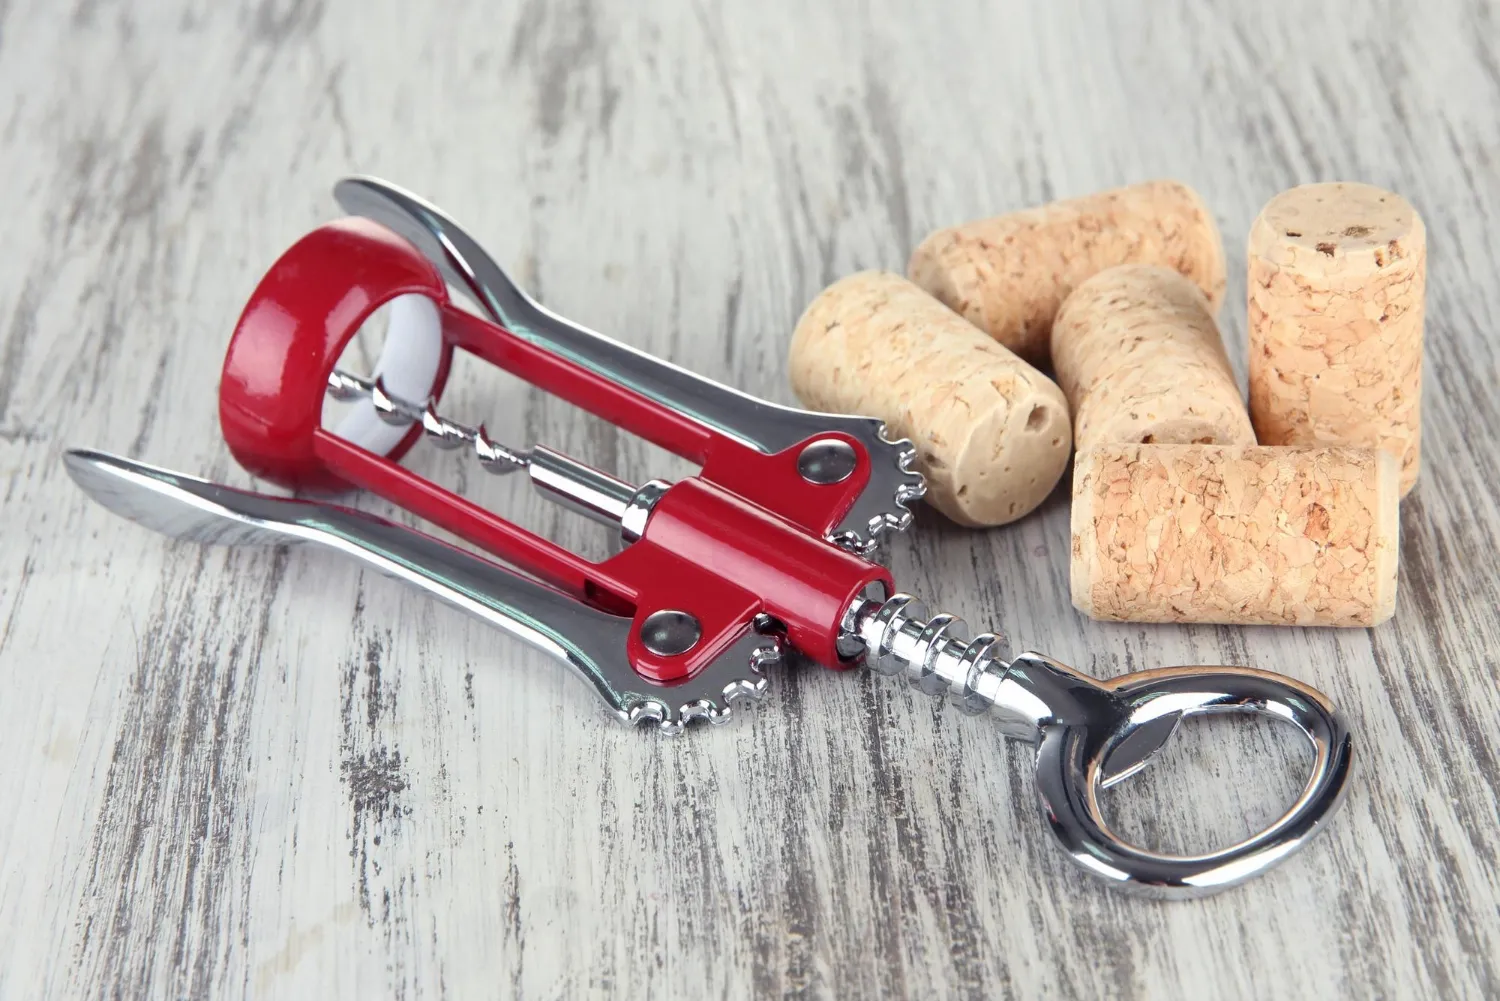 Corkscrew with wine corks on wooden table closeup